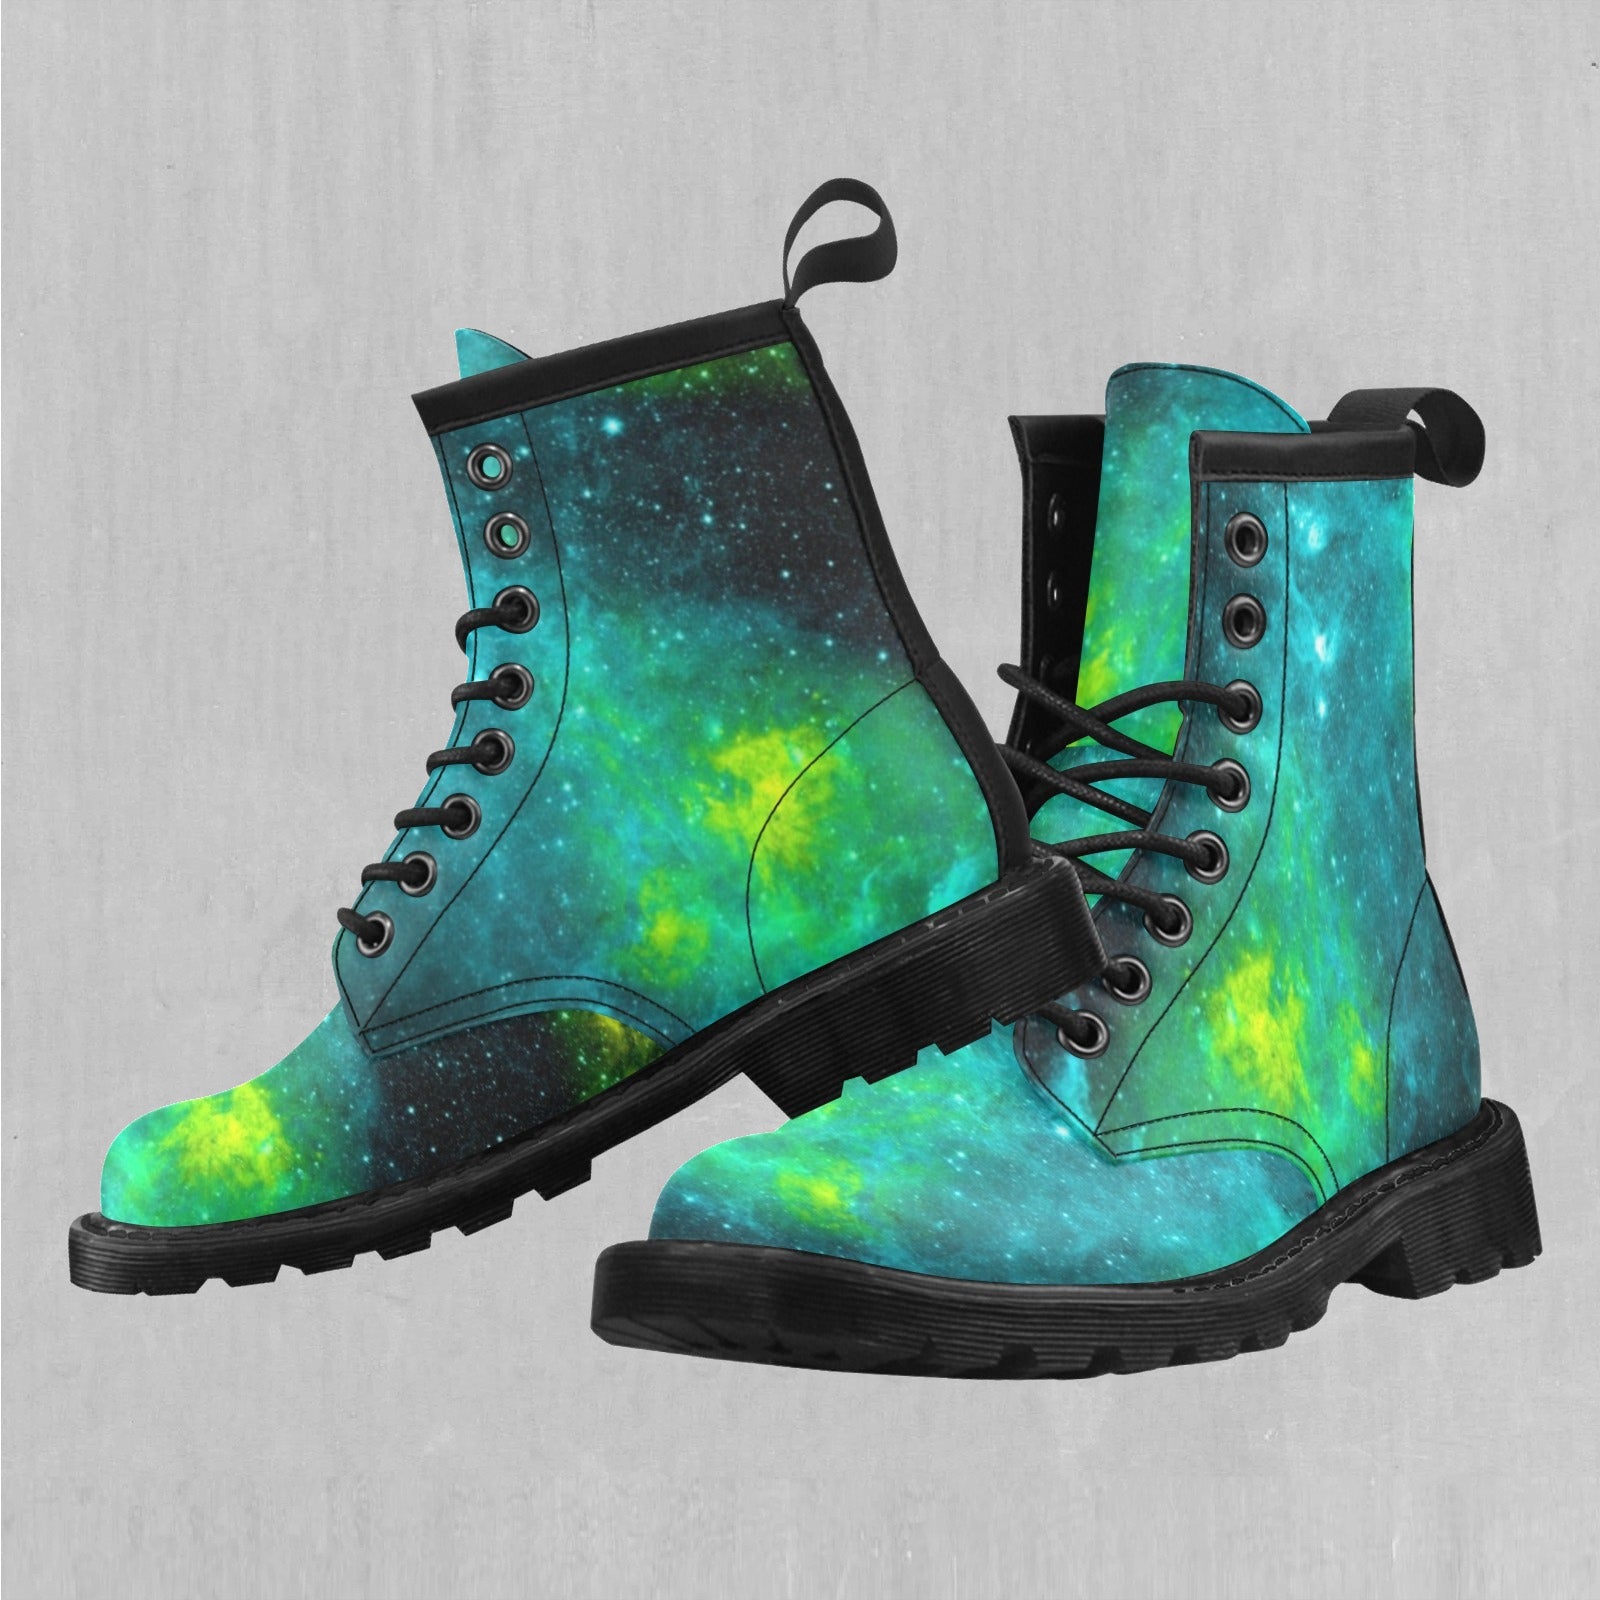 Acidic Realm Women's Lace Up Boots